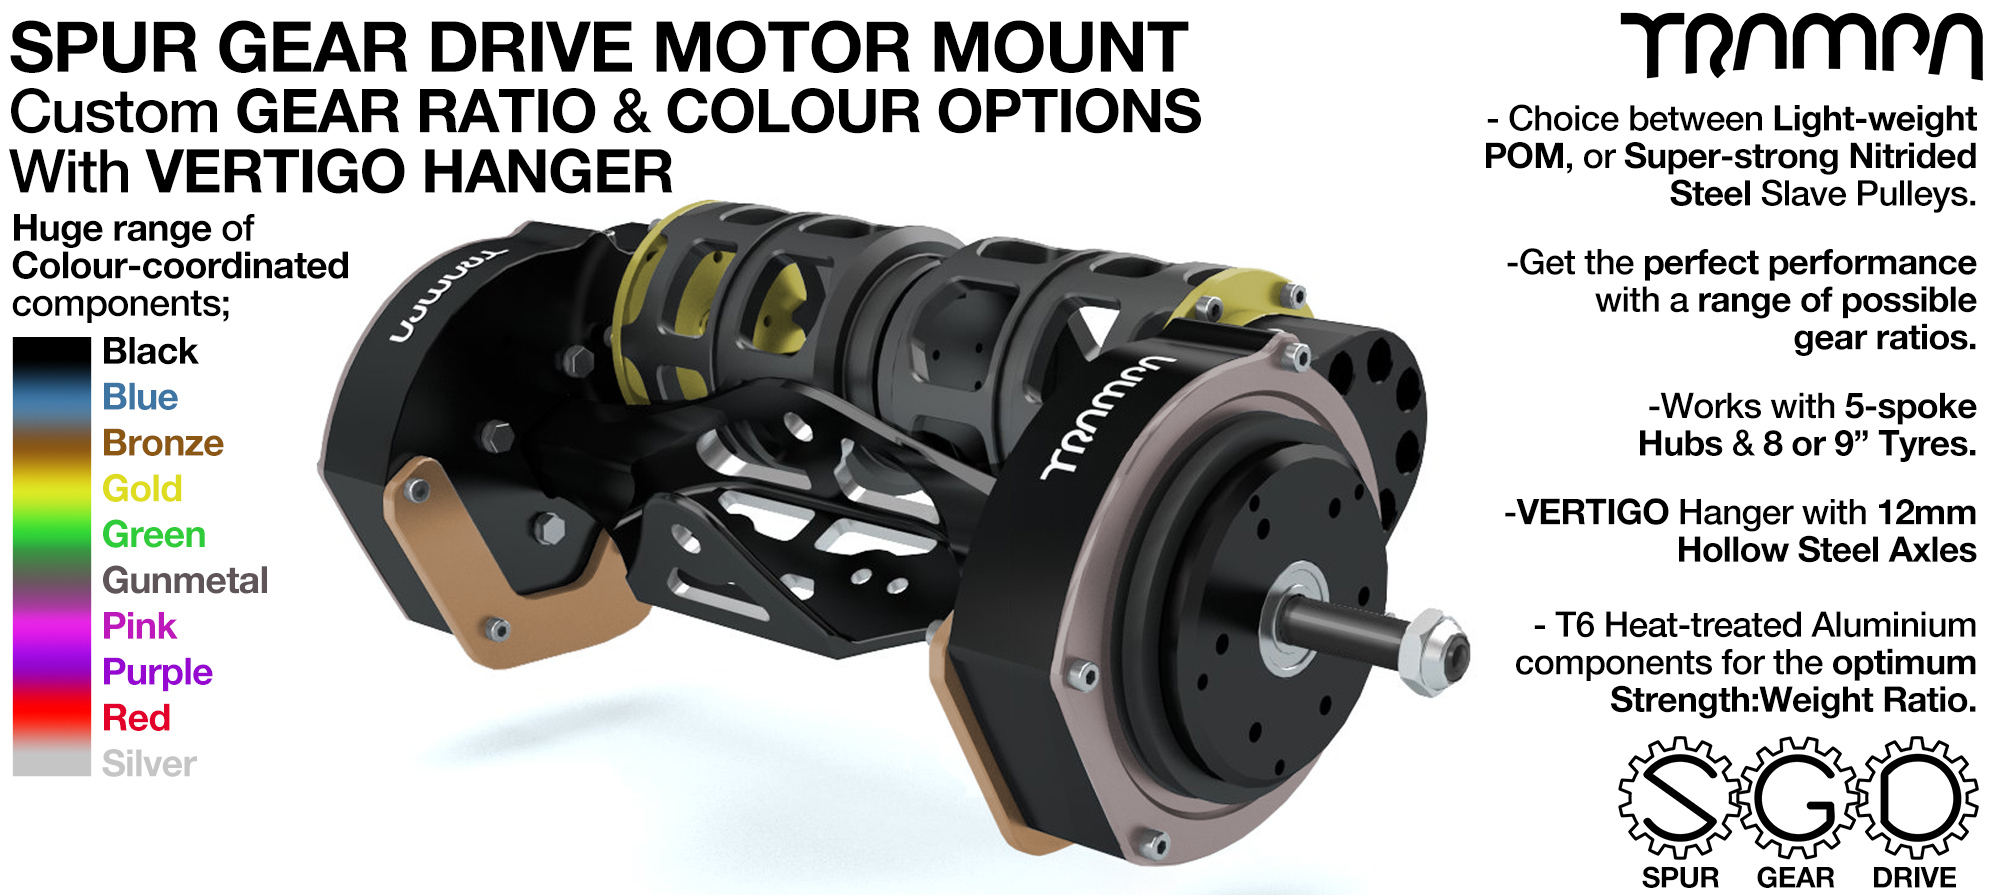 Mountainboard Spur Gear Drive TWIN with PULLEYS & FILTERS Mounted on a VERTIGO Hanger